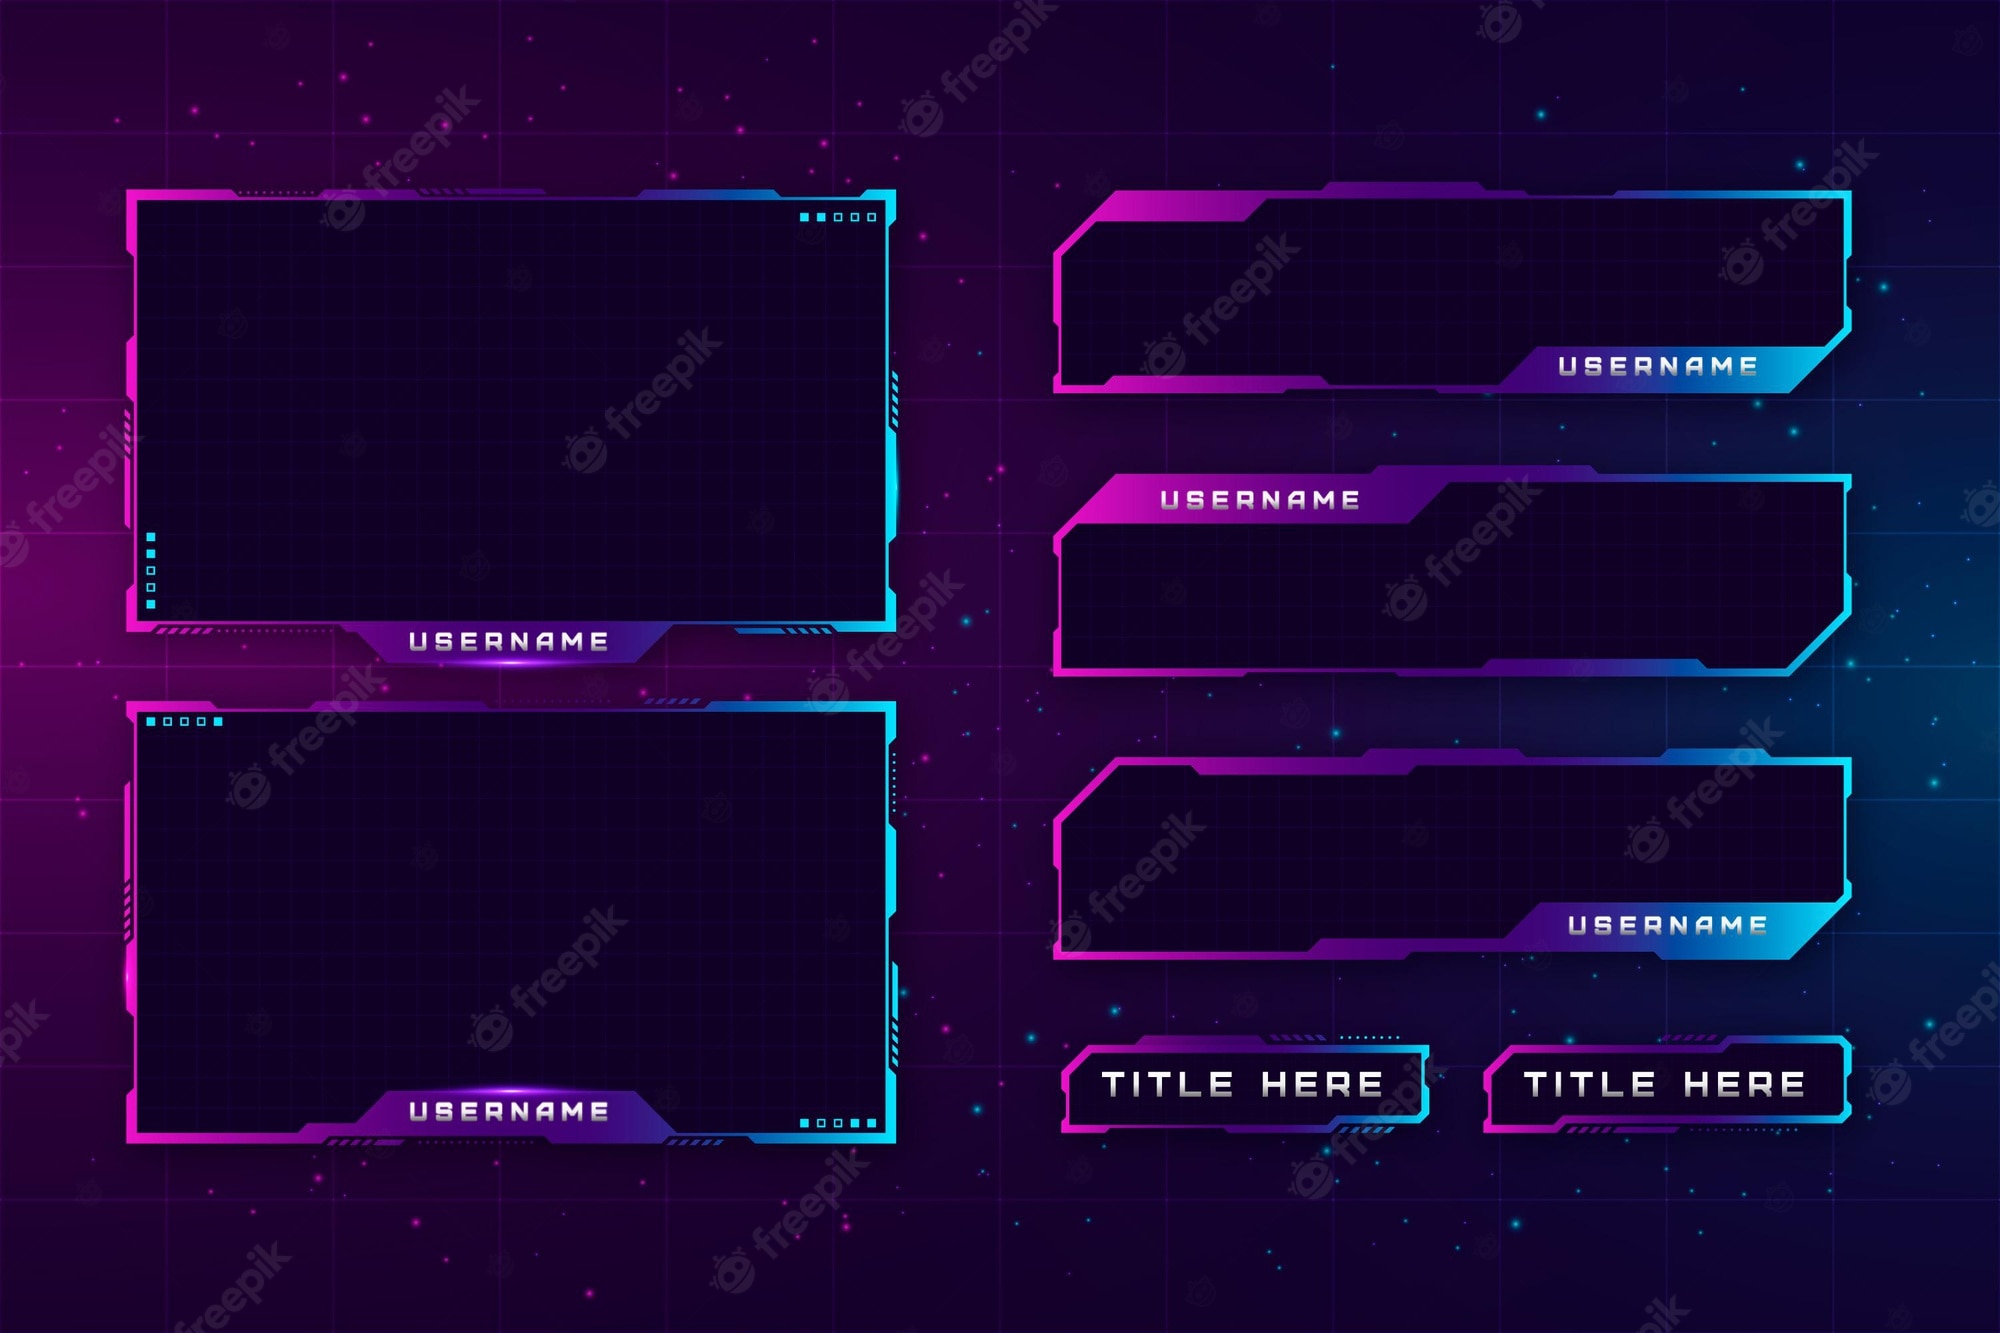 Stream Background Image. Free Vectors, & PSD